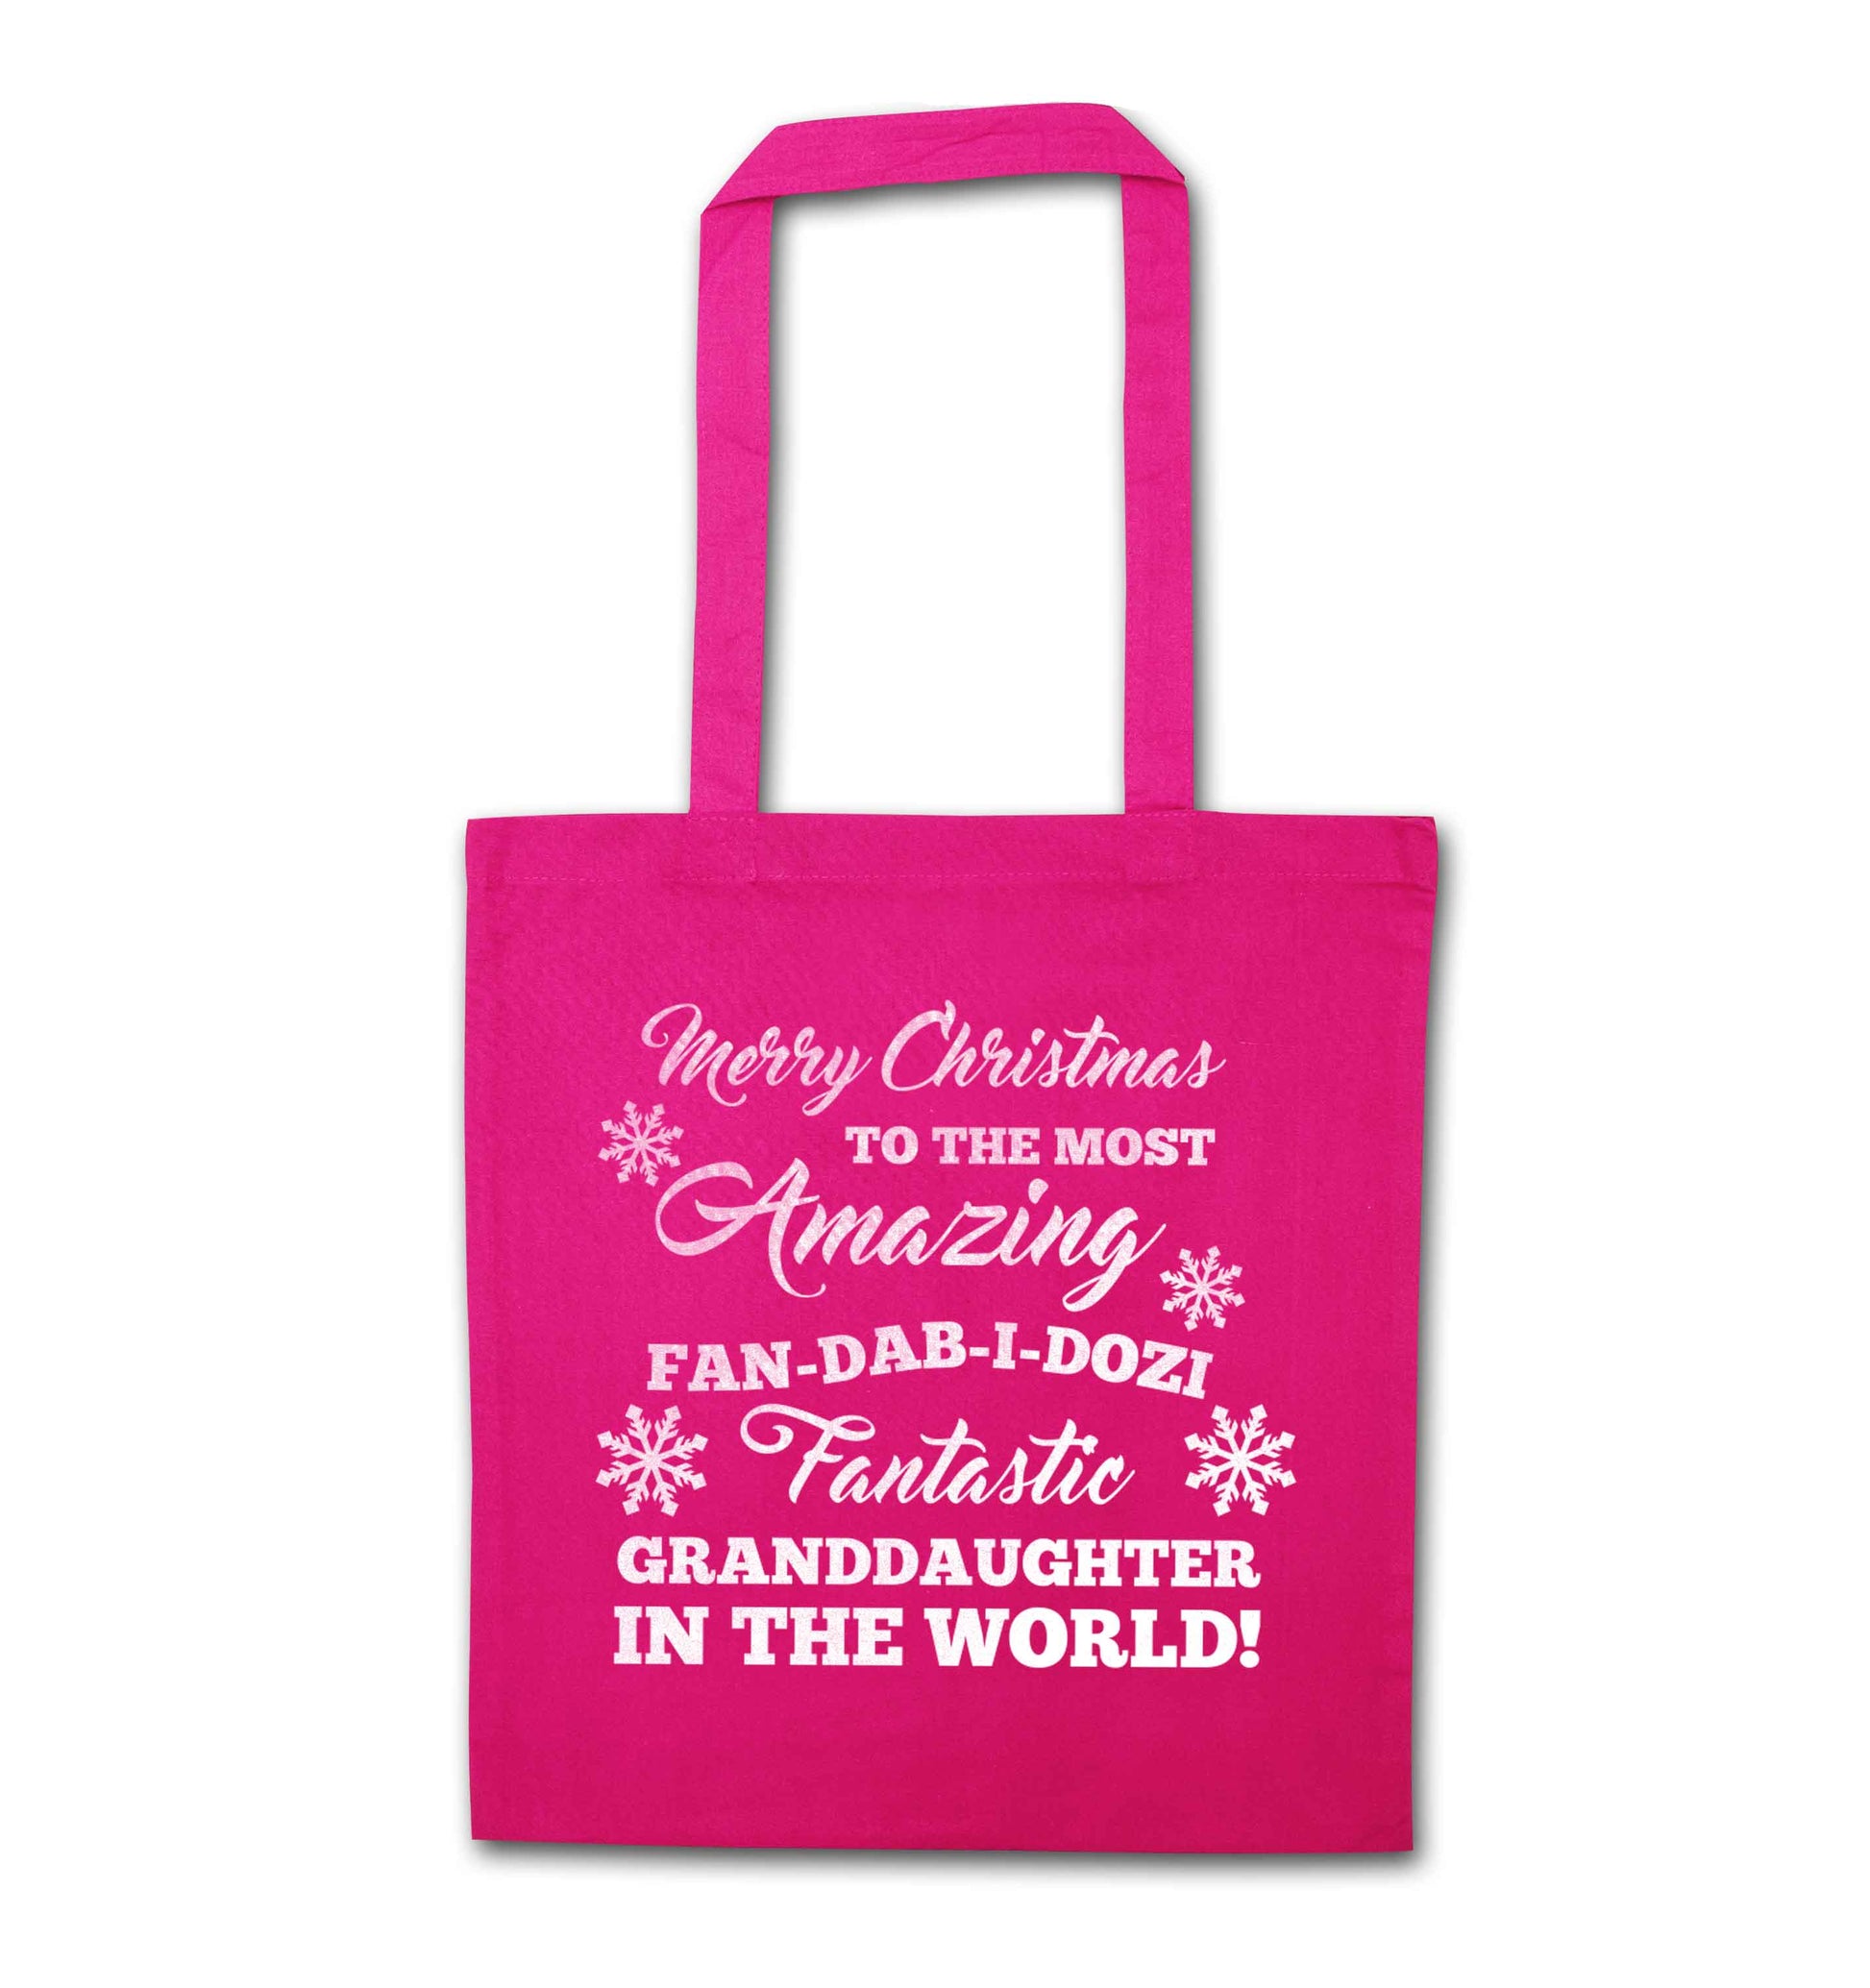 Merry Christmas to the most amazing fan-dab-i-dozi fantasic Granddaughter in the world pink tote bag